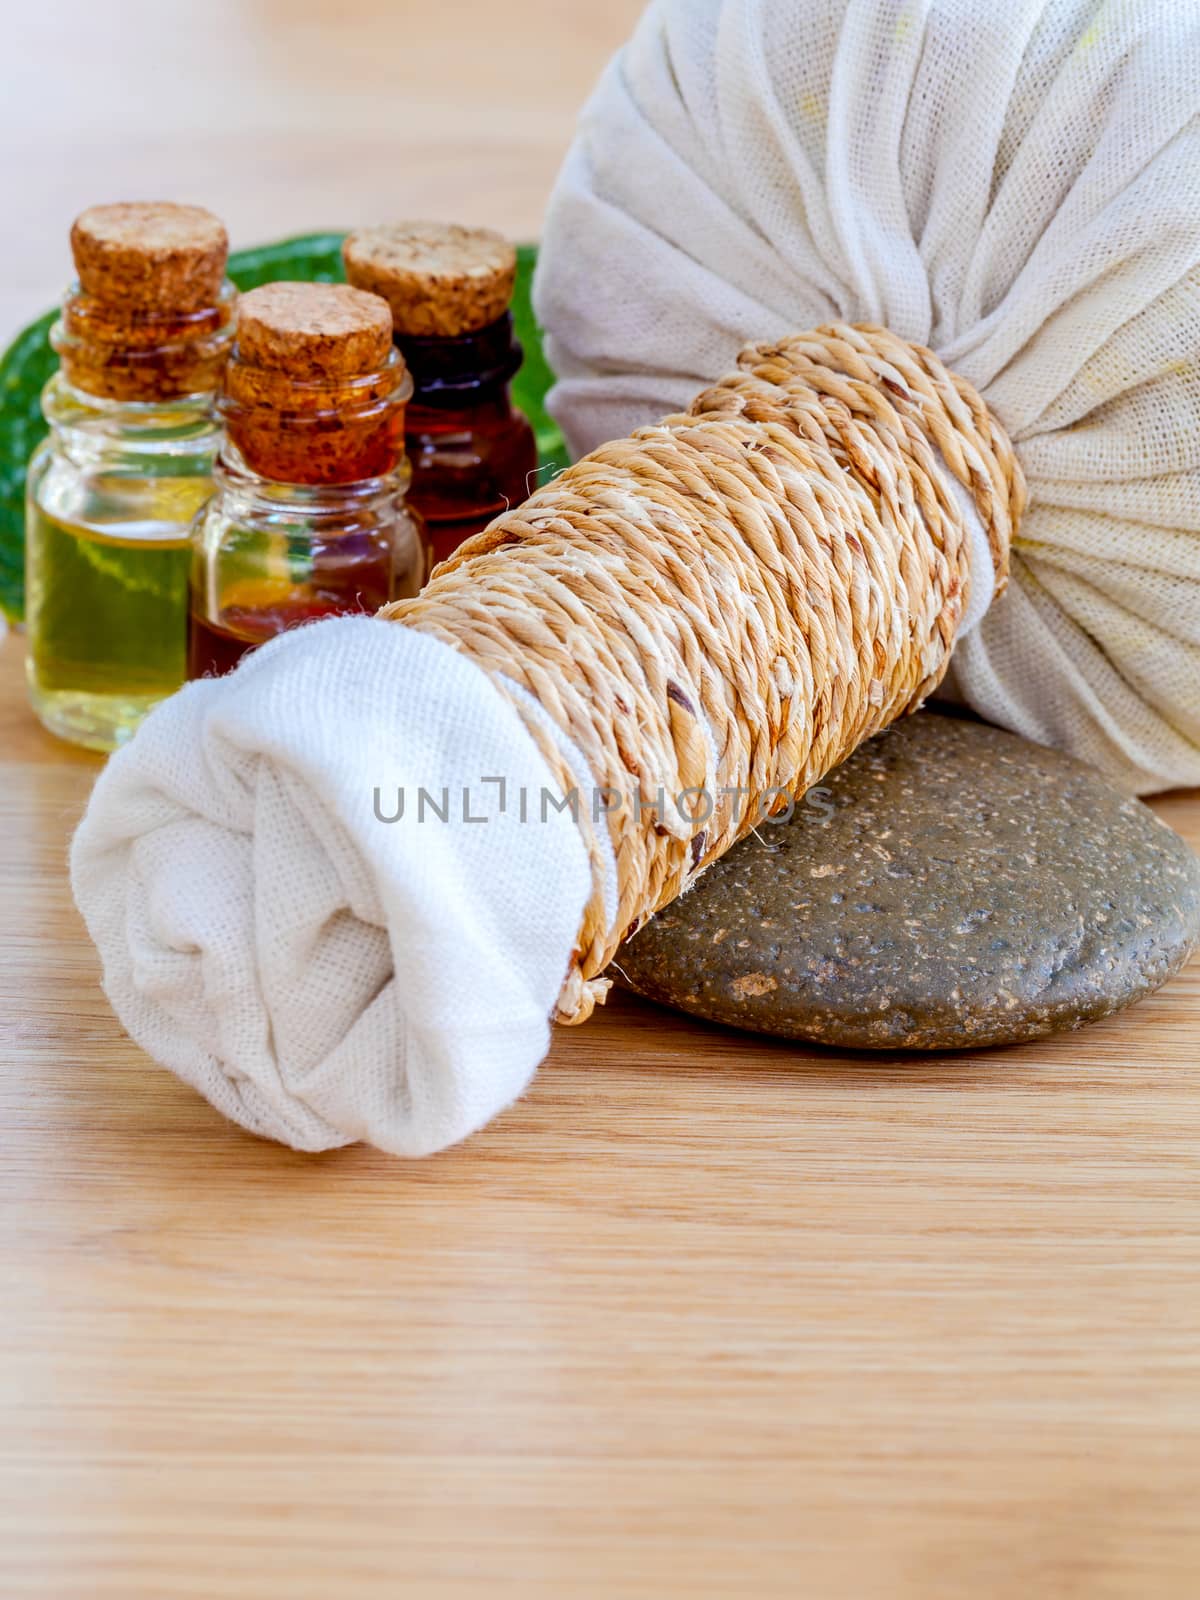 Natural Spa Ingredients . The herbal compress ball and massage oil for spa treatment.